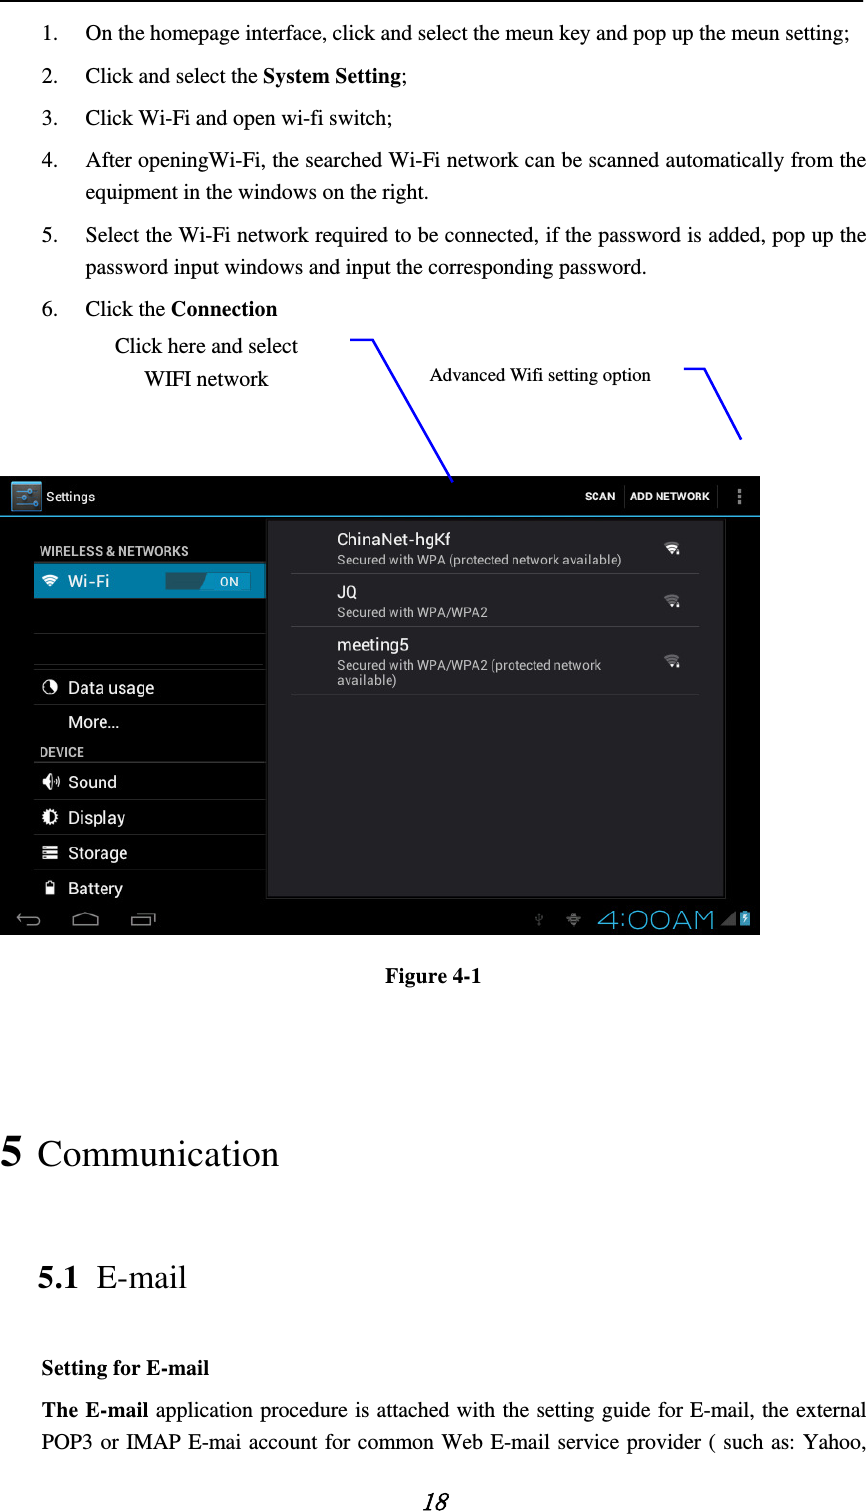    18 1. On the homepage interface, click and select the meun key and pop up the meun setting;   2. Click and select the System Setting;   3. Click Wi-Fi and open wi-fi switch;   4. After openingWi-Fi, the searched Wi-Fi network can be scanned automatically from the equipment in the windows on the right.   5. Select the Wi-Fi network required to be connected, if the password is added, pop up the password input windows and input the corresponding password. 6. Click the Connection     Figure 4-1  5 Communication 5.1 E-mail Setting for E-mail The E-mail application procedure is attached with the setting guide for E-mail, the external POP3 or IMAP E-mai account for common Web E-mail service provider ( such as: Yahoo, Advanced Wifi setting option Click here and select WIFI network 